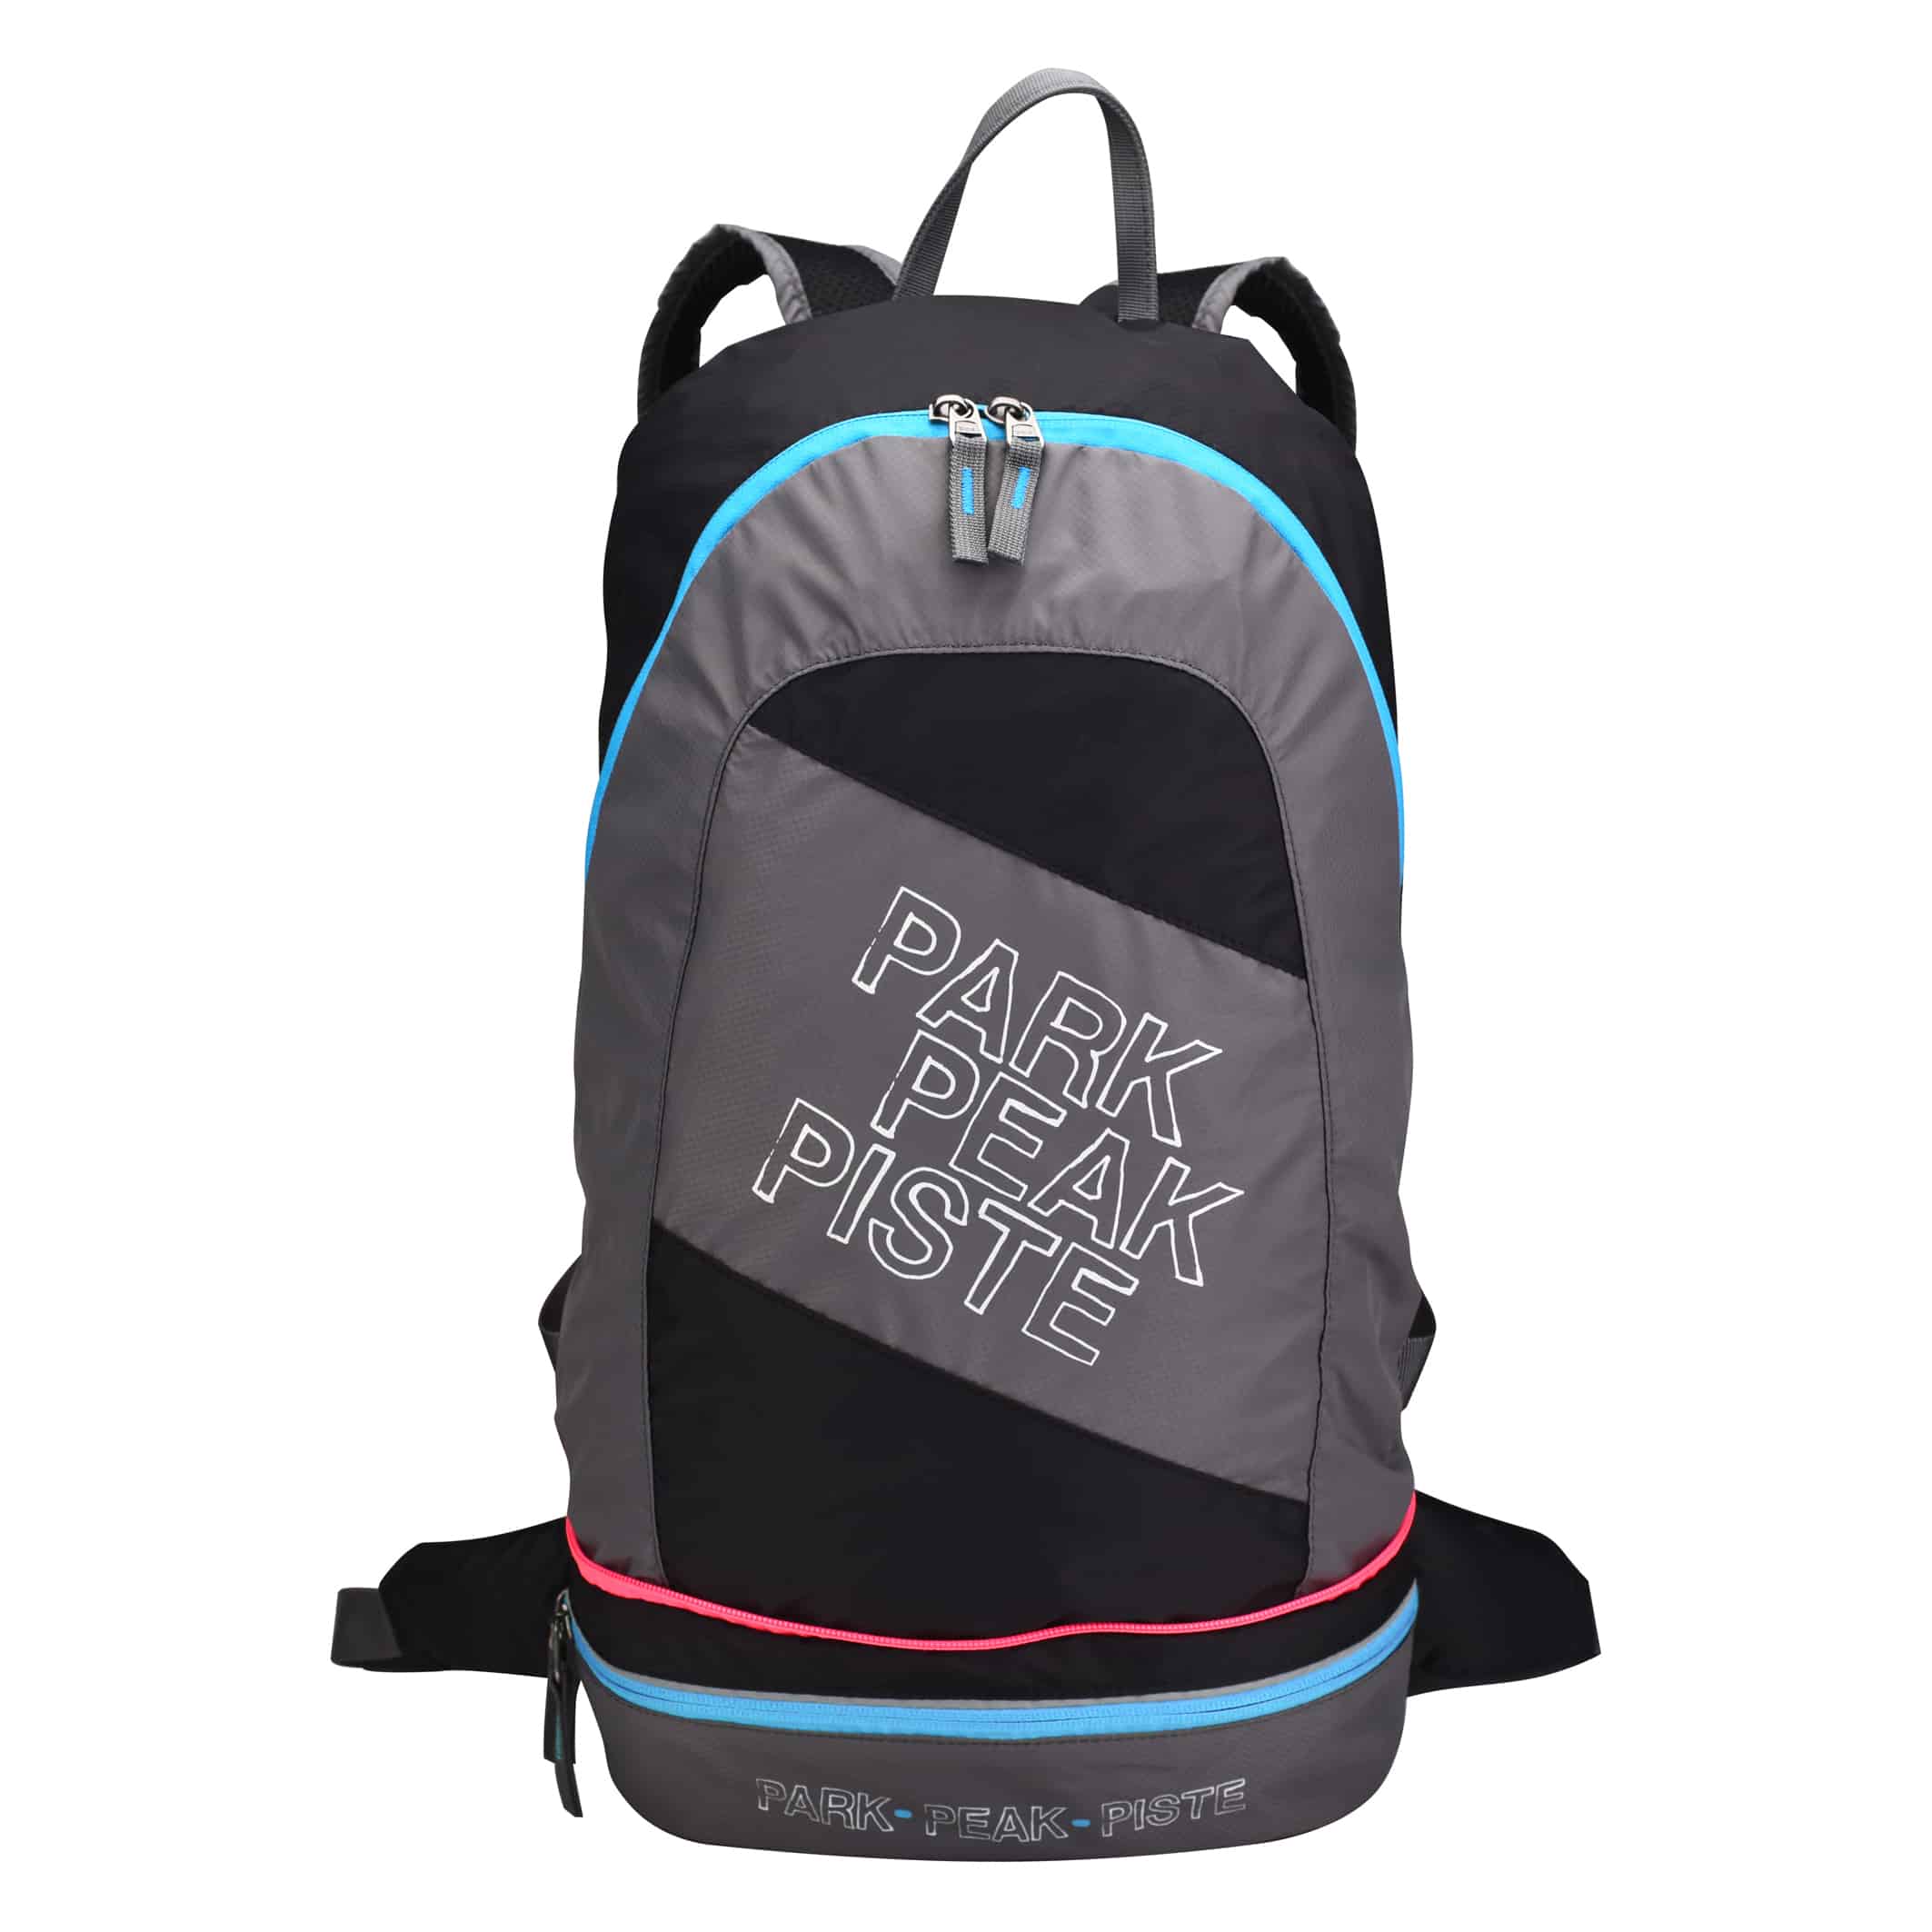 MB550-05-Backpack-2-in-1-Rock-Blue-Pink-Open